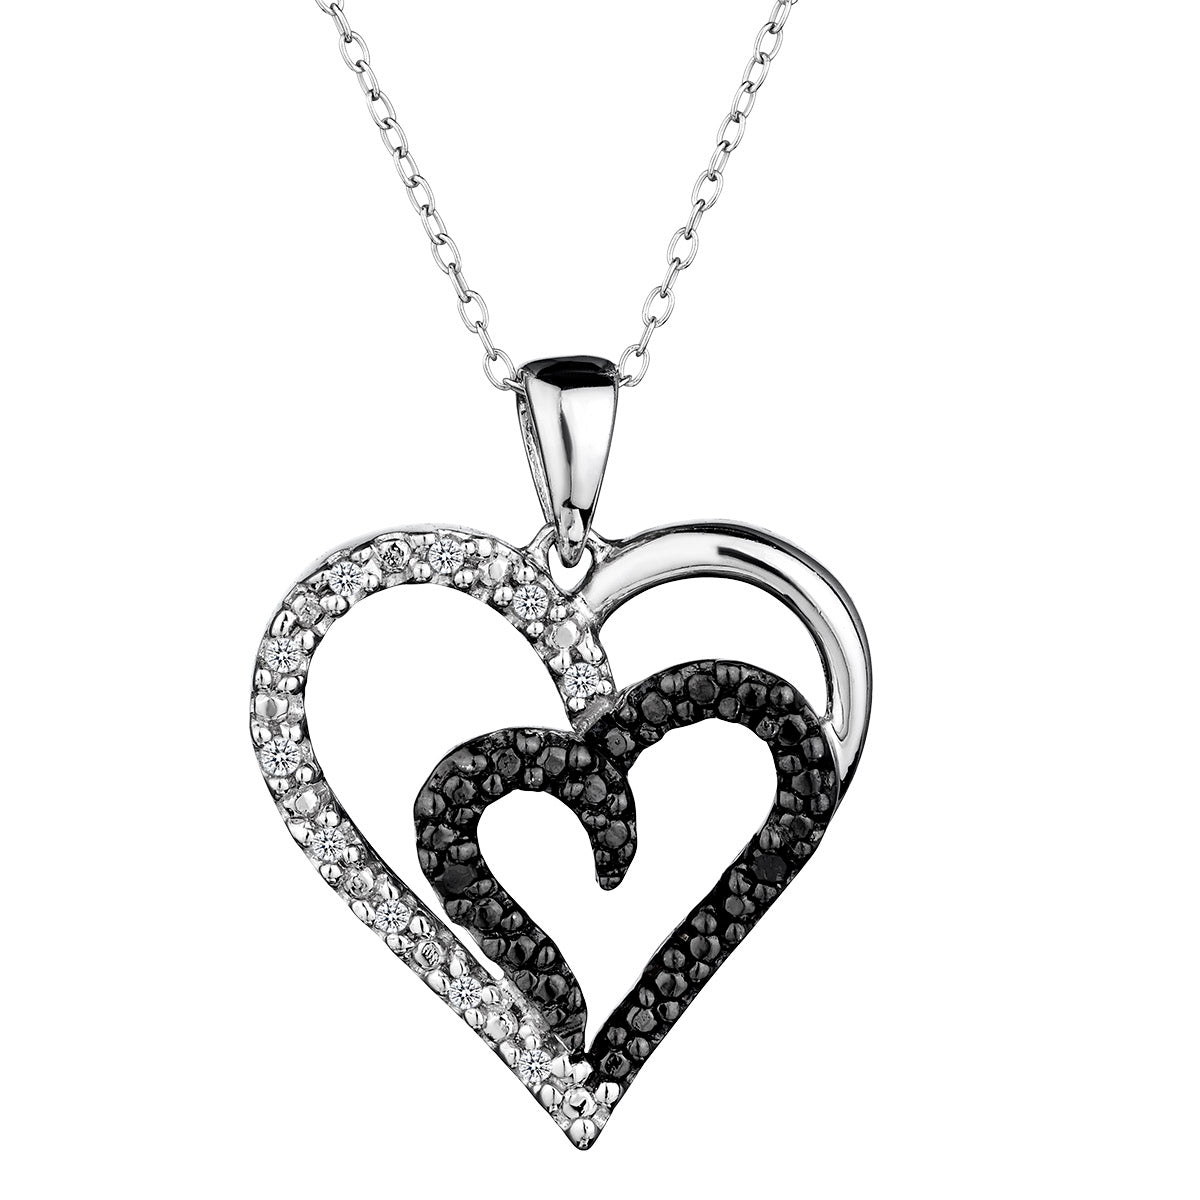 .10 Carat of Black and White Diamonds Double Heart Pendant,  Sterling Silver. Necklaces and Pendants. Griffin Jewellery Designs.